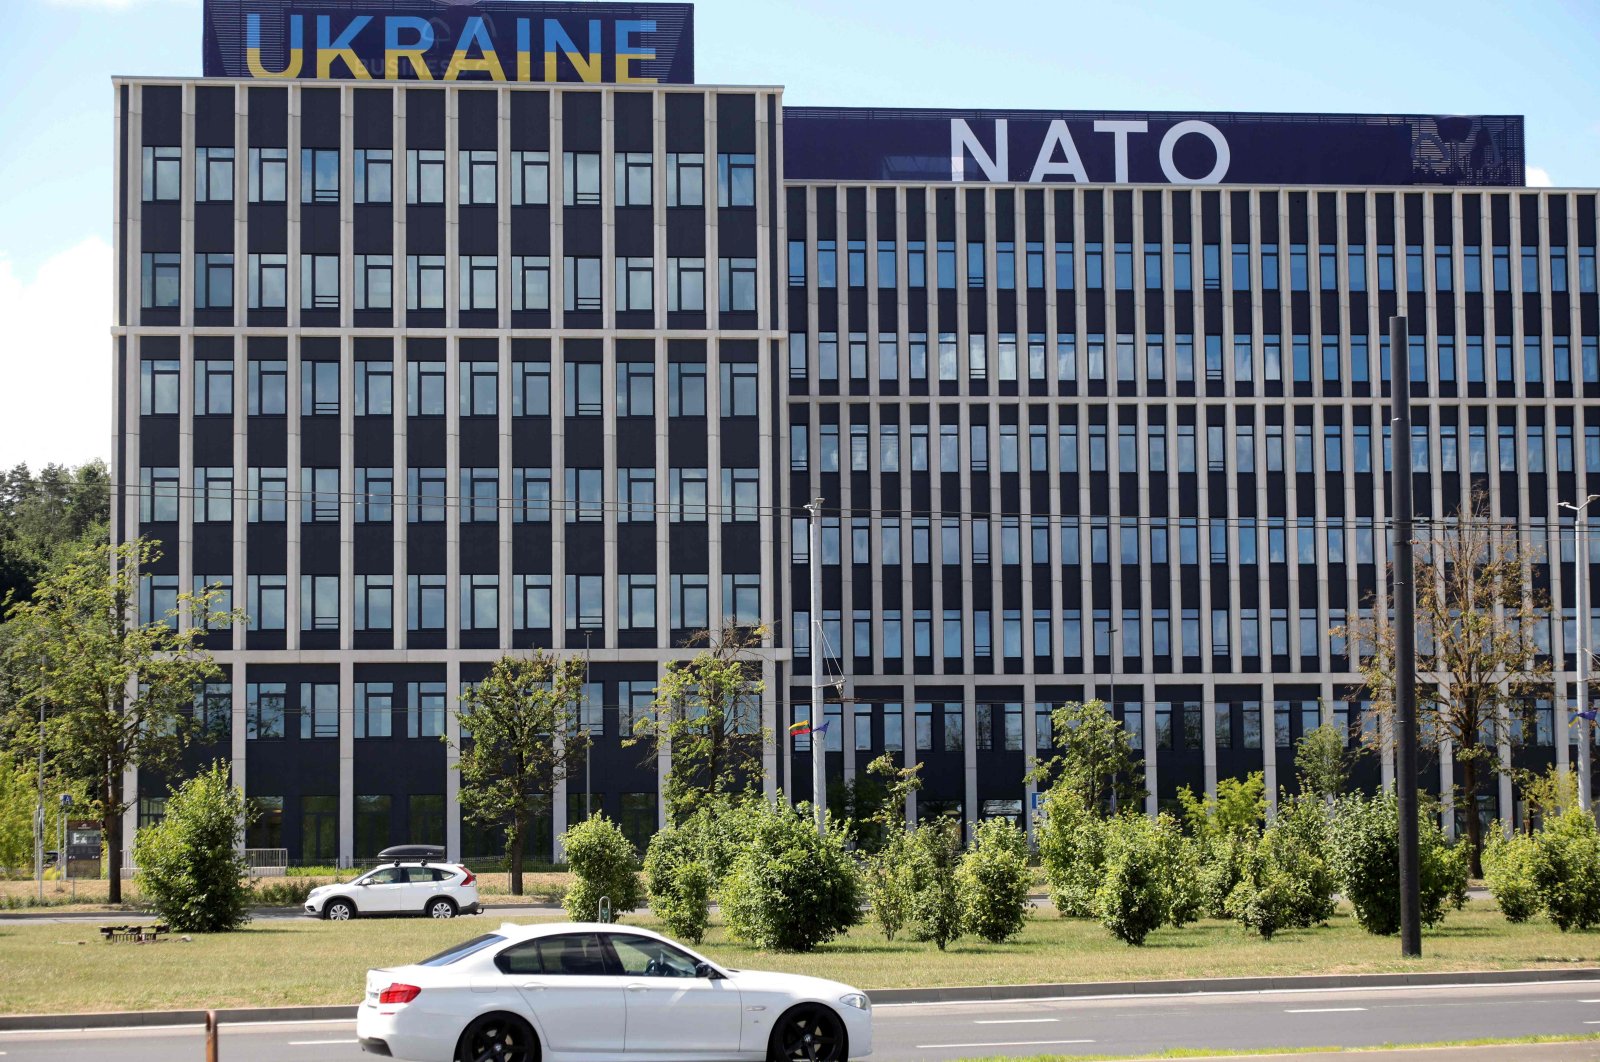 Banners reading "Ukraine" and "NATO" are seen at the NATO summit venue in Vilnius ahead of the July 11-12 NATO summit, Lithuania, July 9, 2023. (AFP Photo)